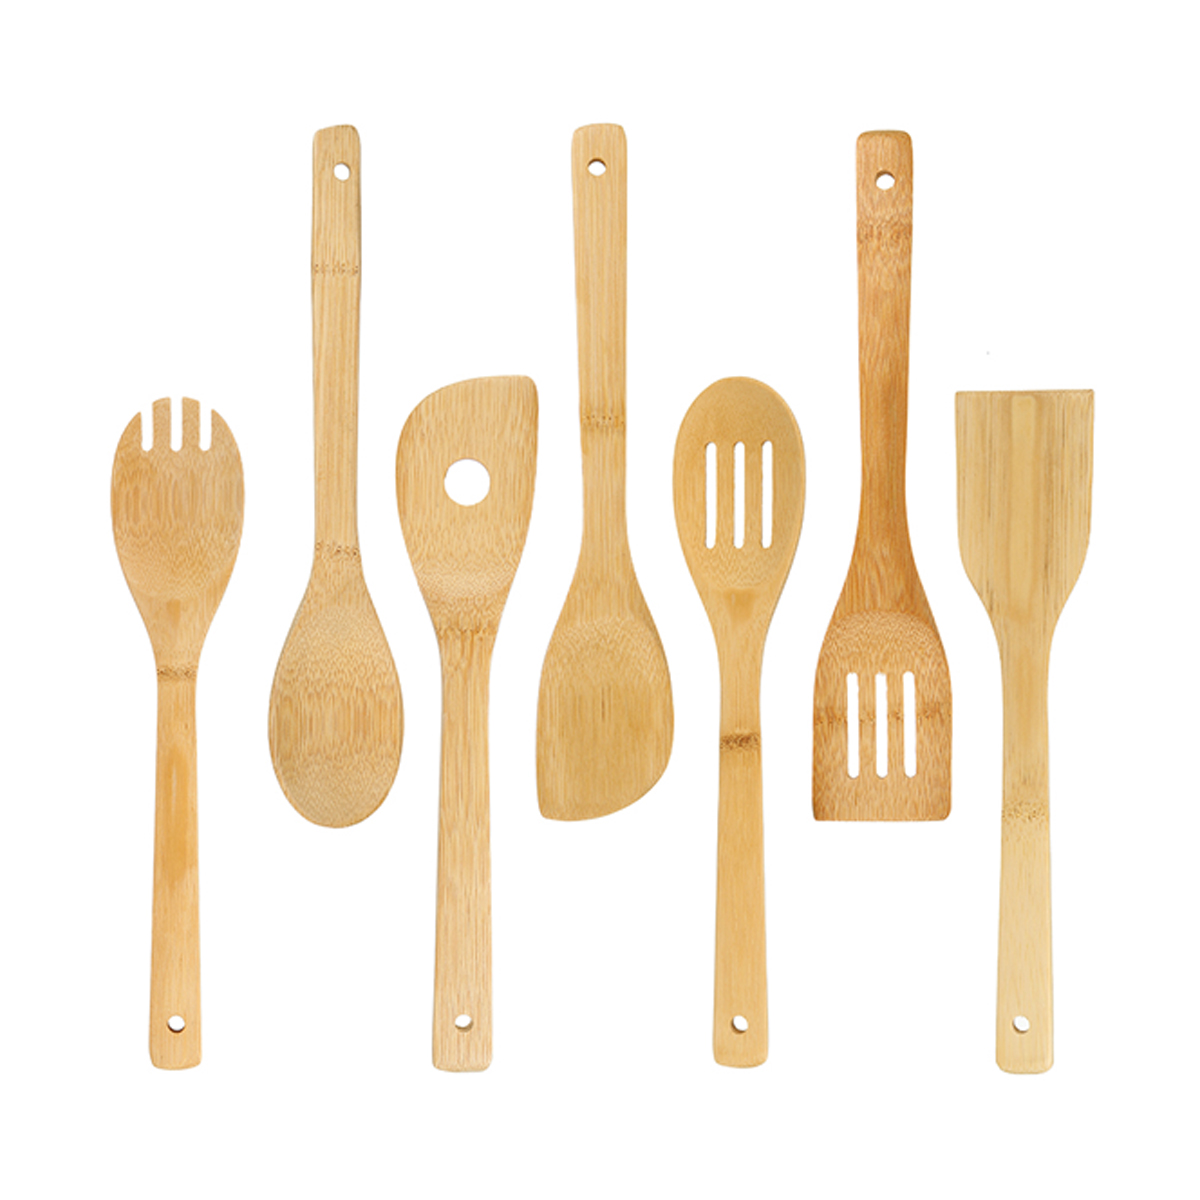 8PCS-Bamboo-Nonstick-Cooking-Utensils-Wooden-Spoons-and-Spatula-Utensil-Set-1680404-4